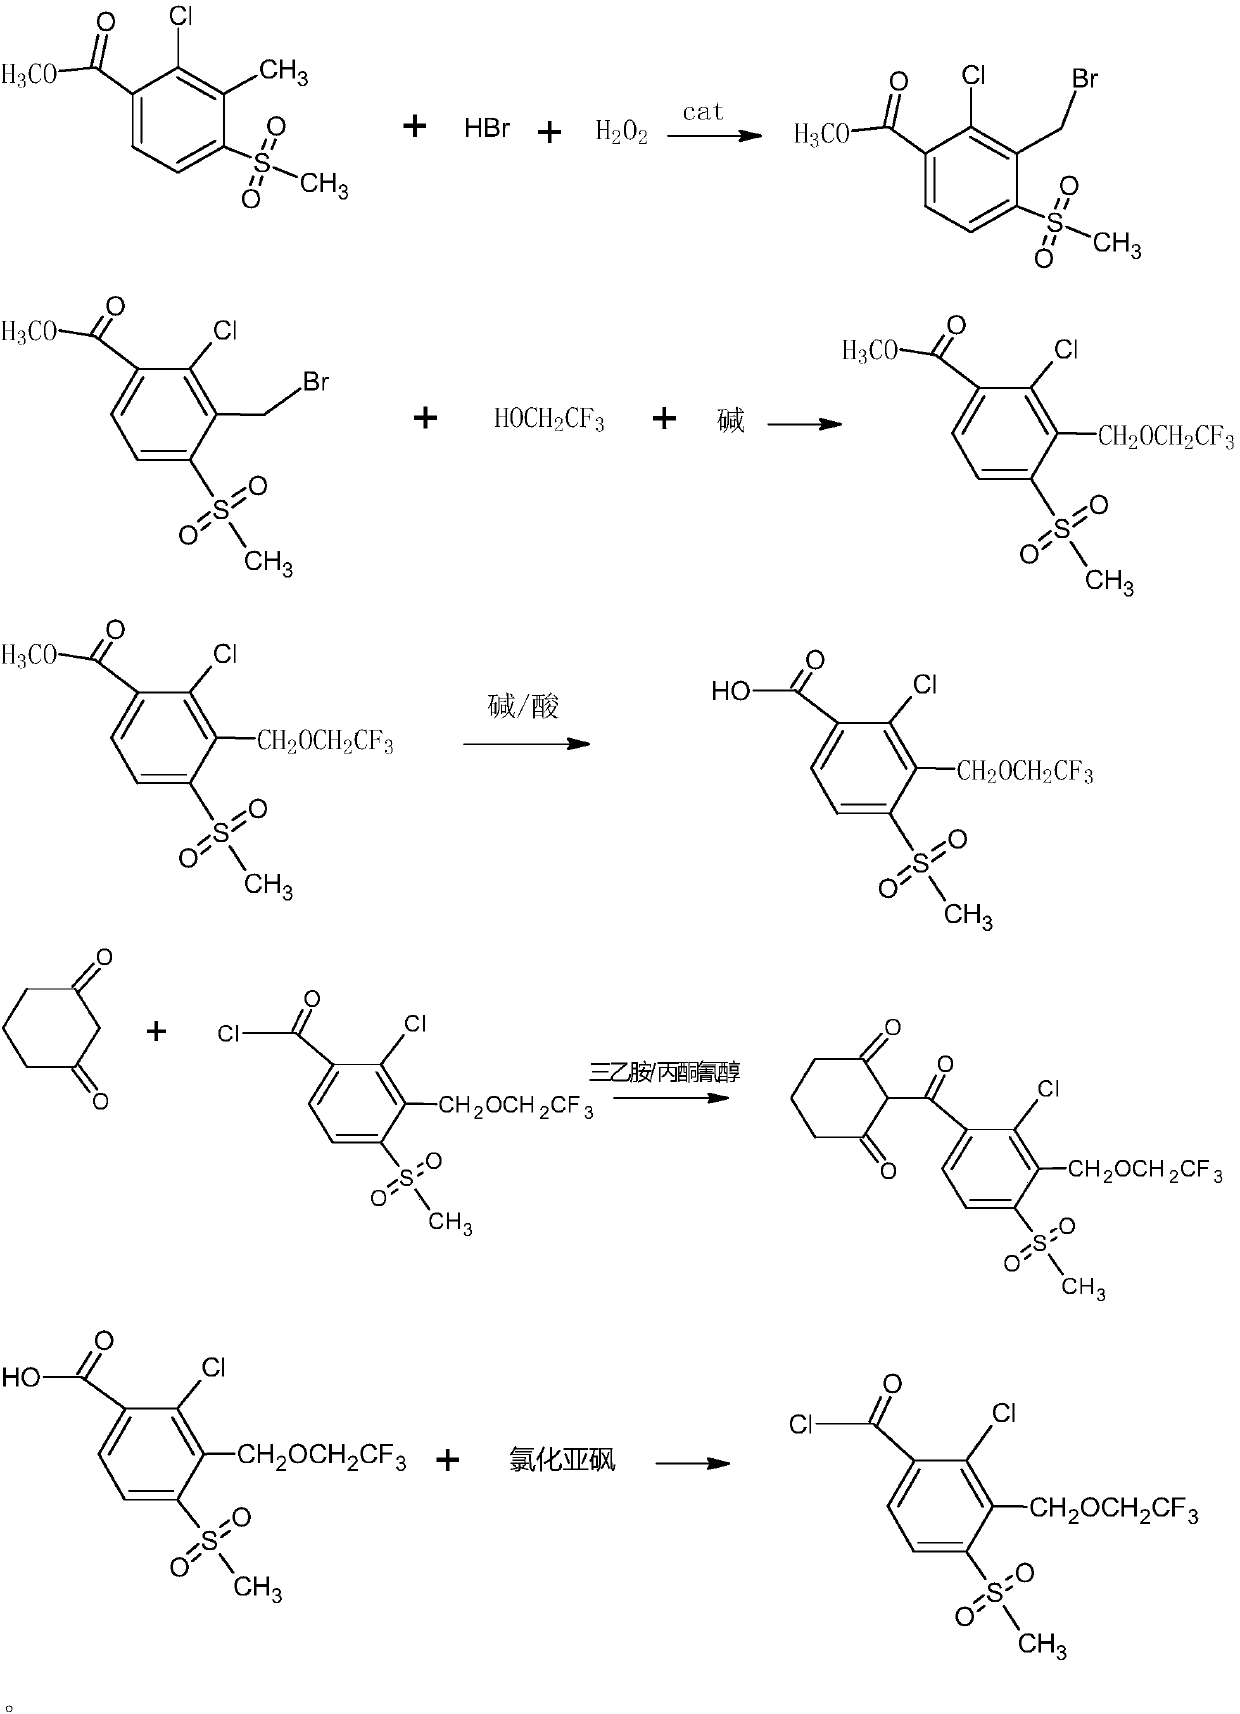 Synthetic process of herbicide tembotrione